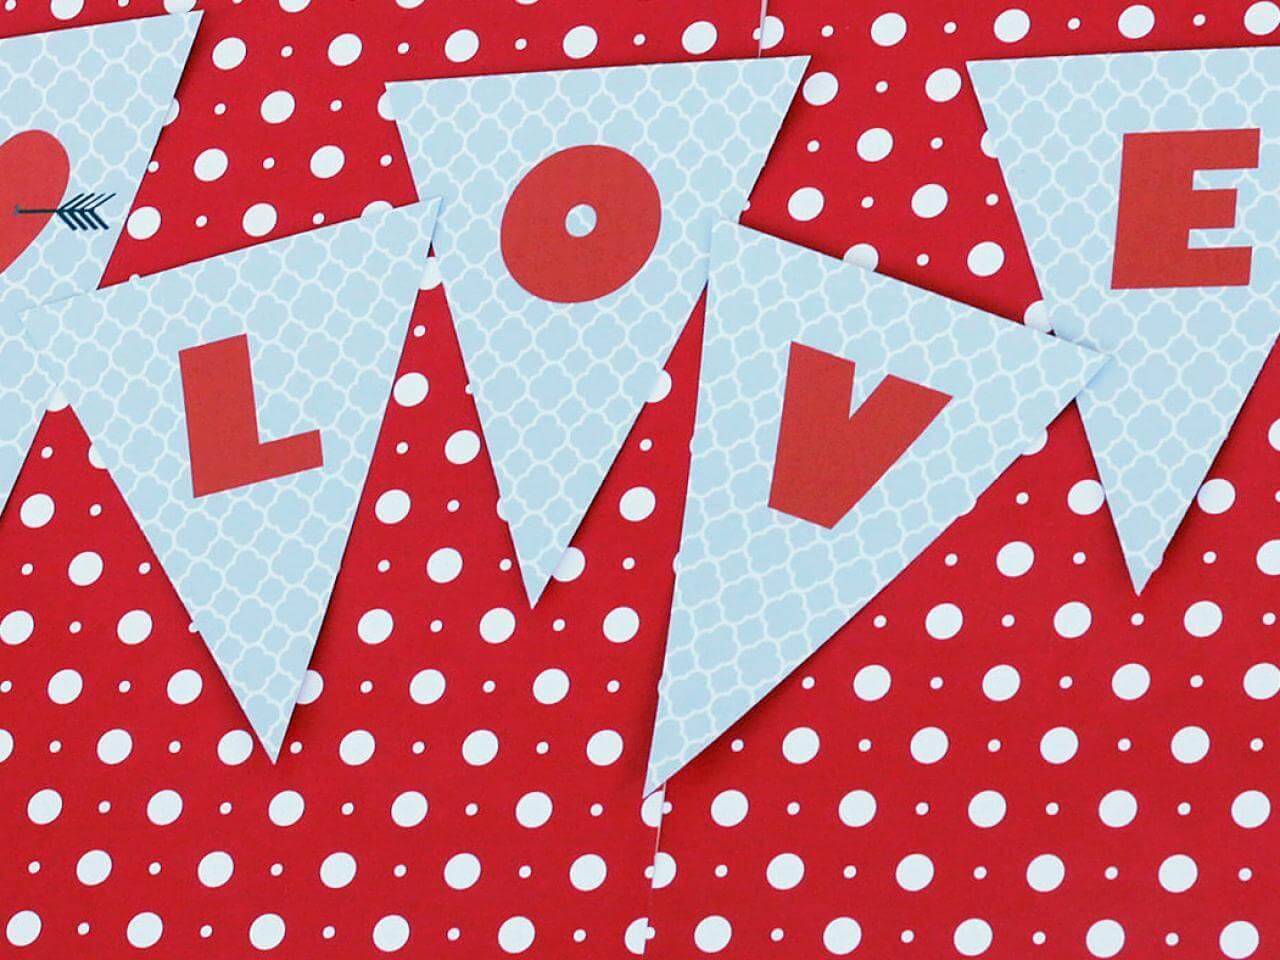 A red and white banner with white polka dots
